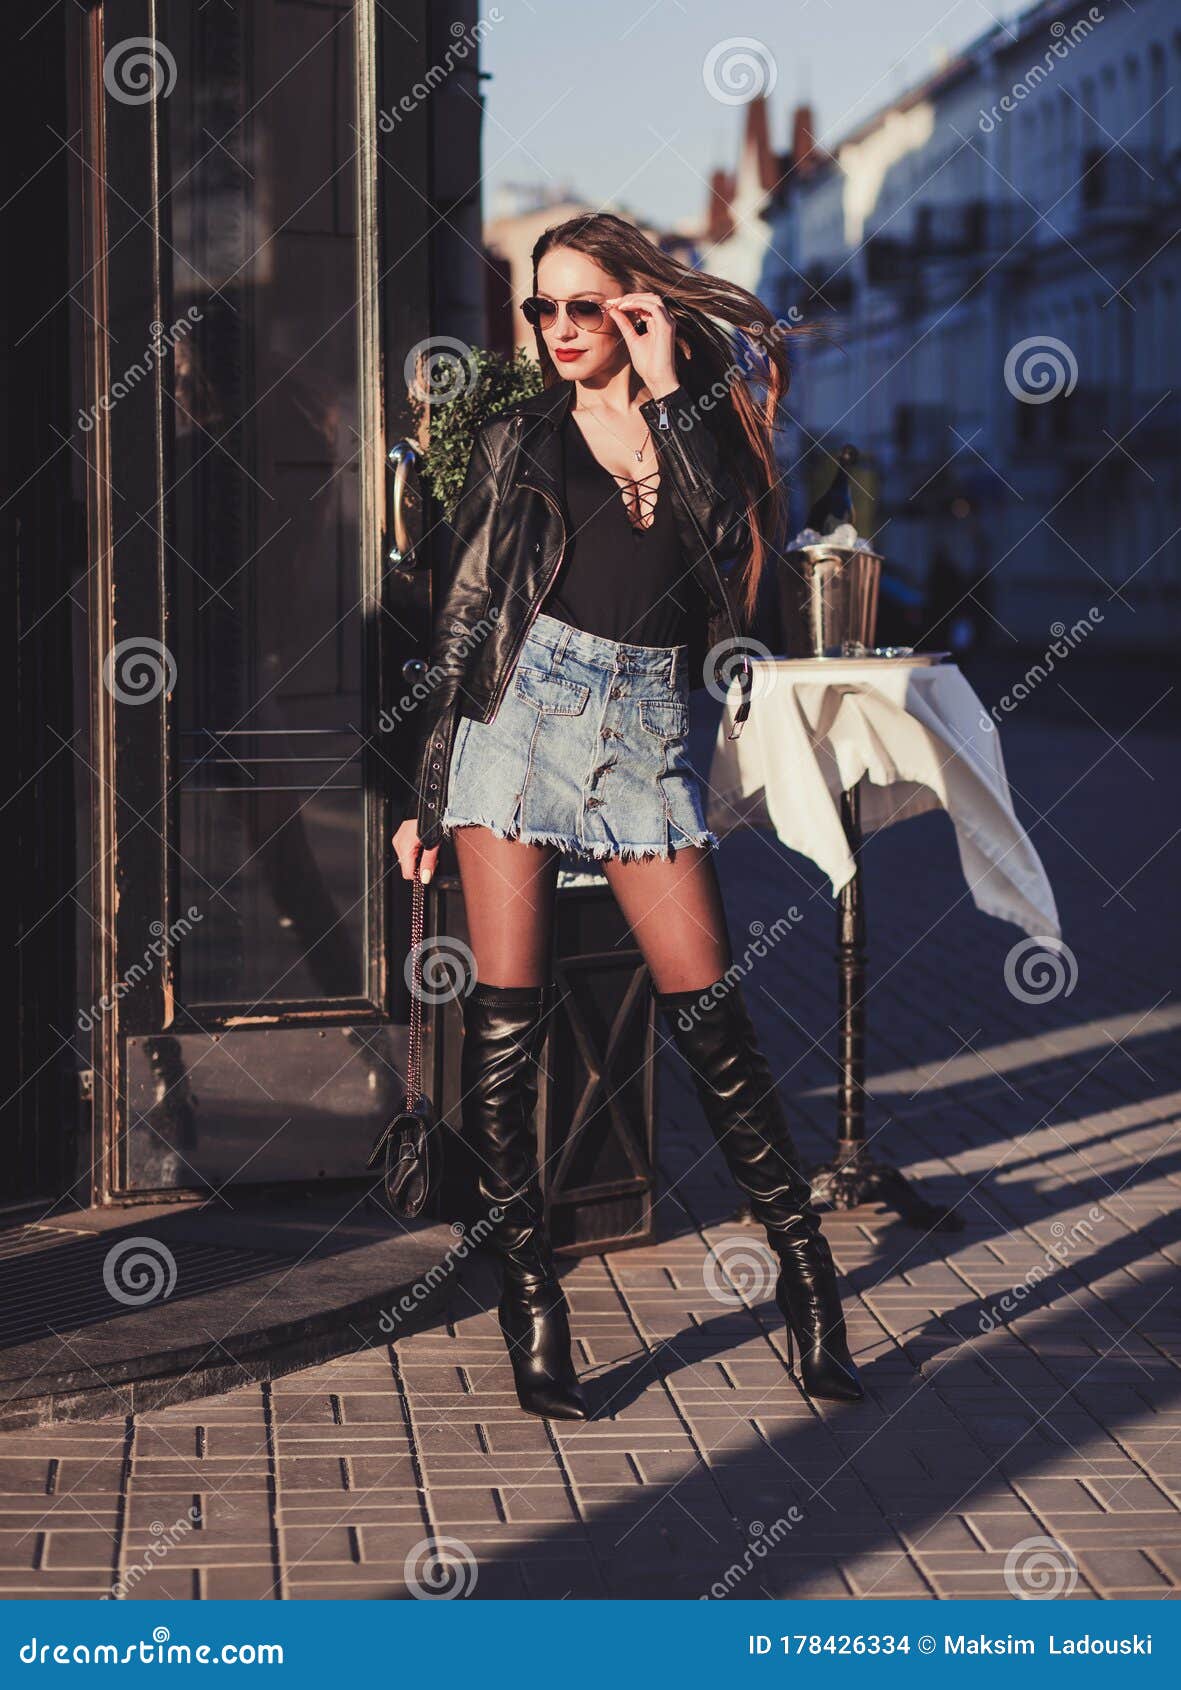 Model woman with long legs stock photo. Image of person - 178426334